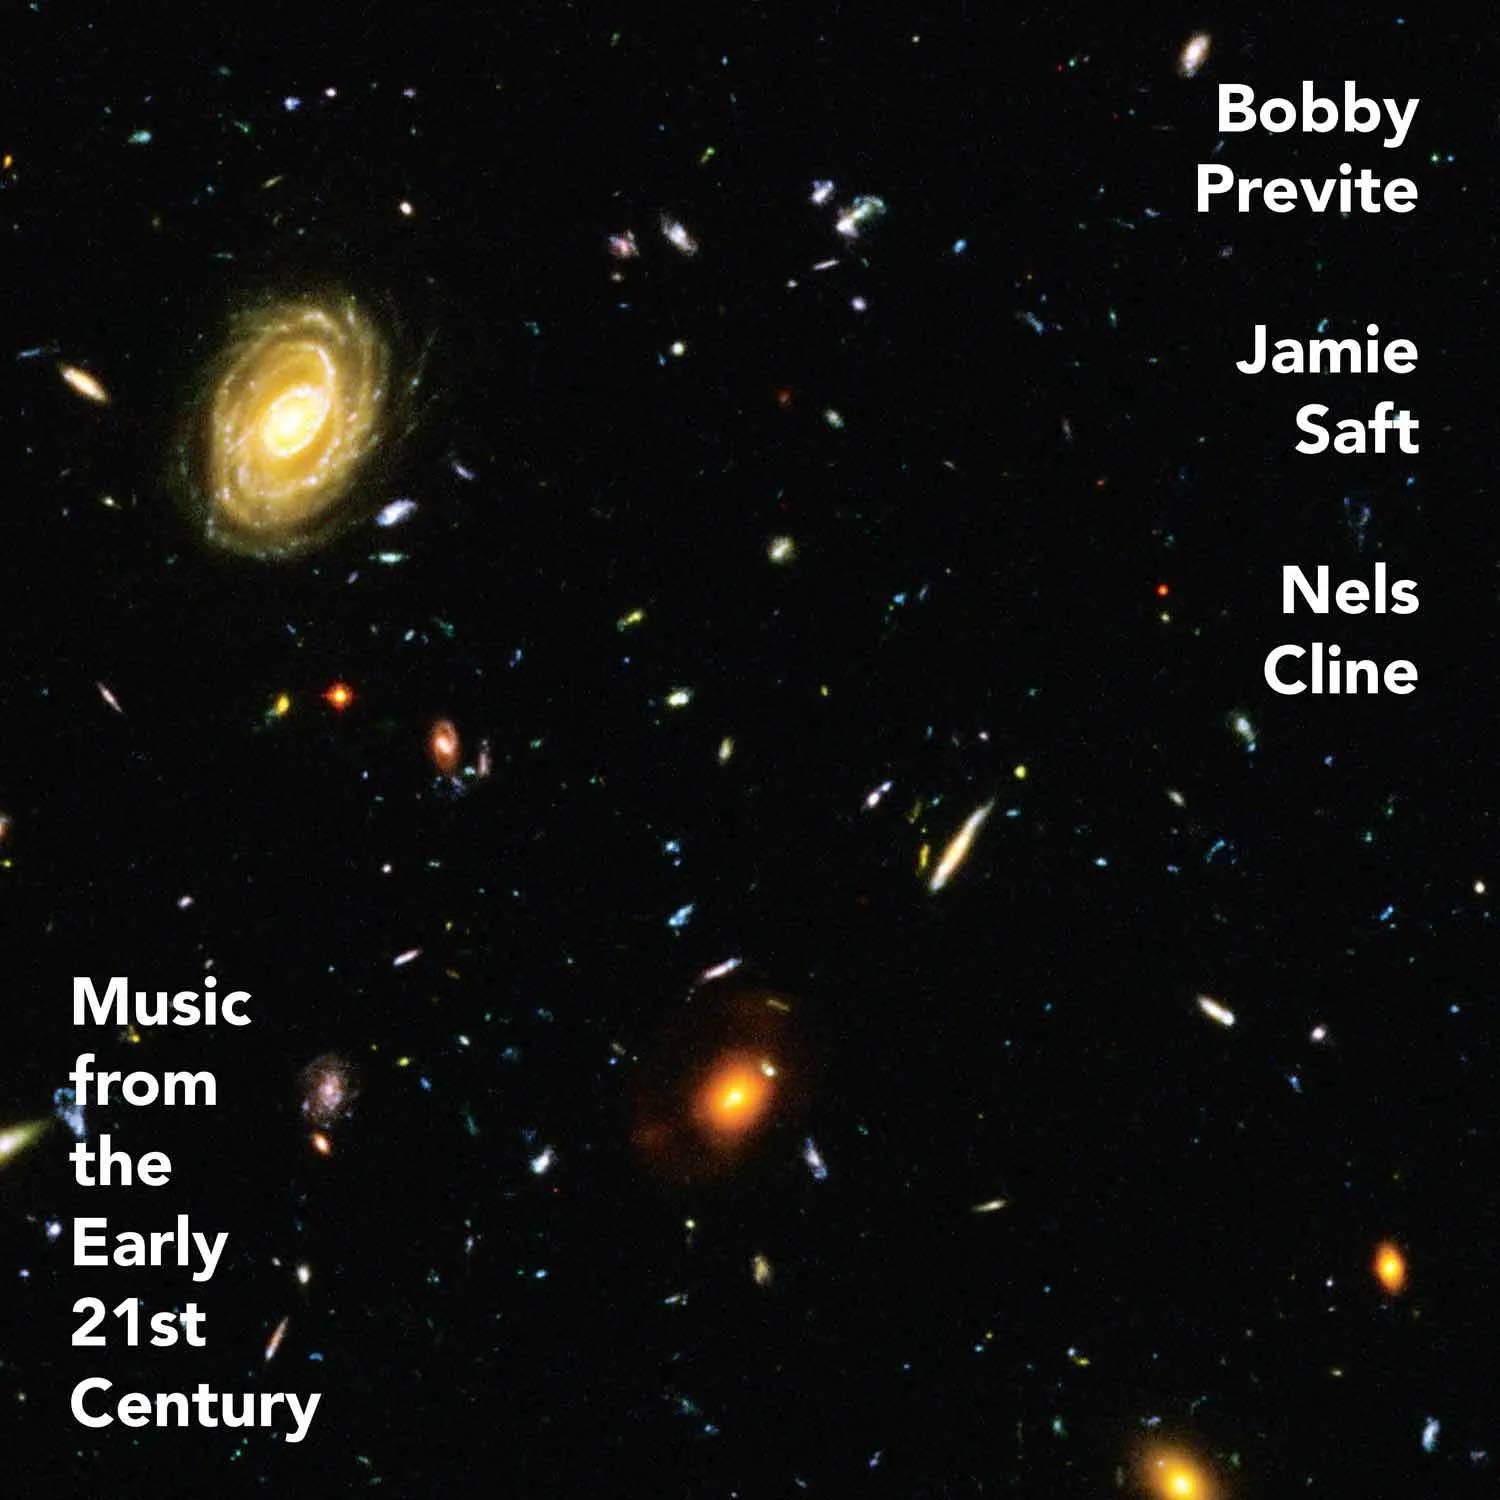 previte saft cline - Music from the early 21st century